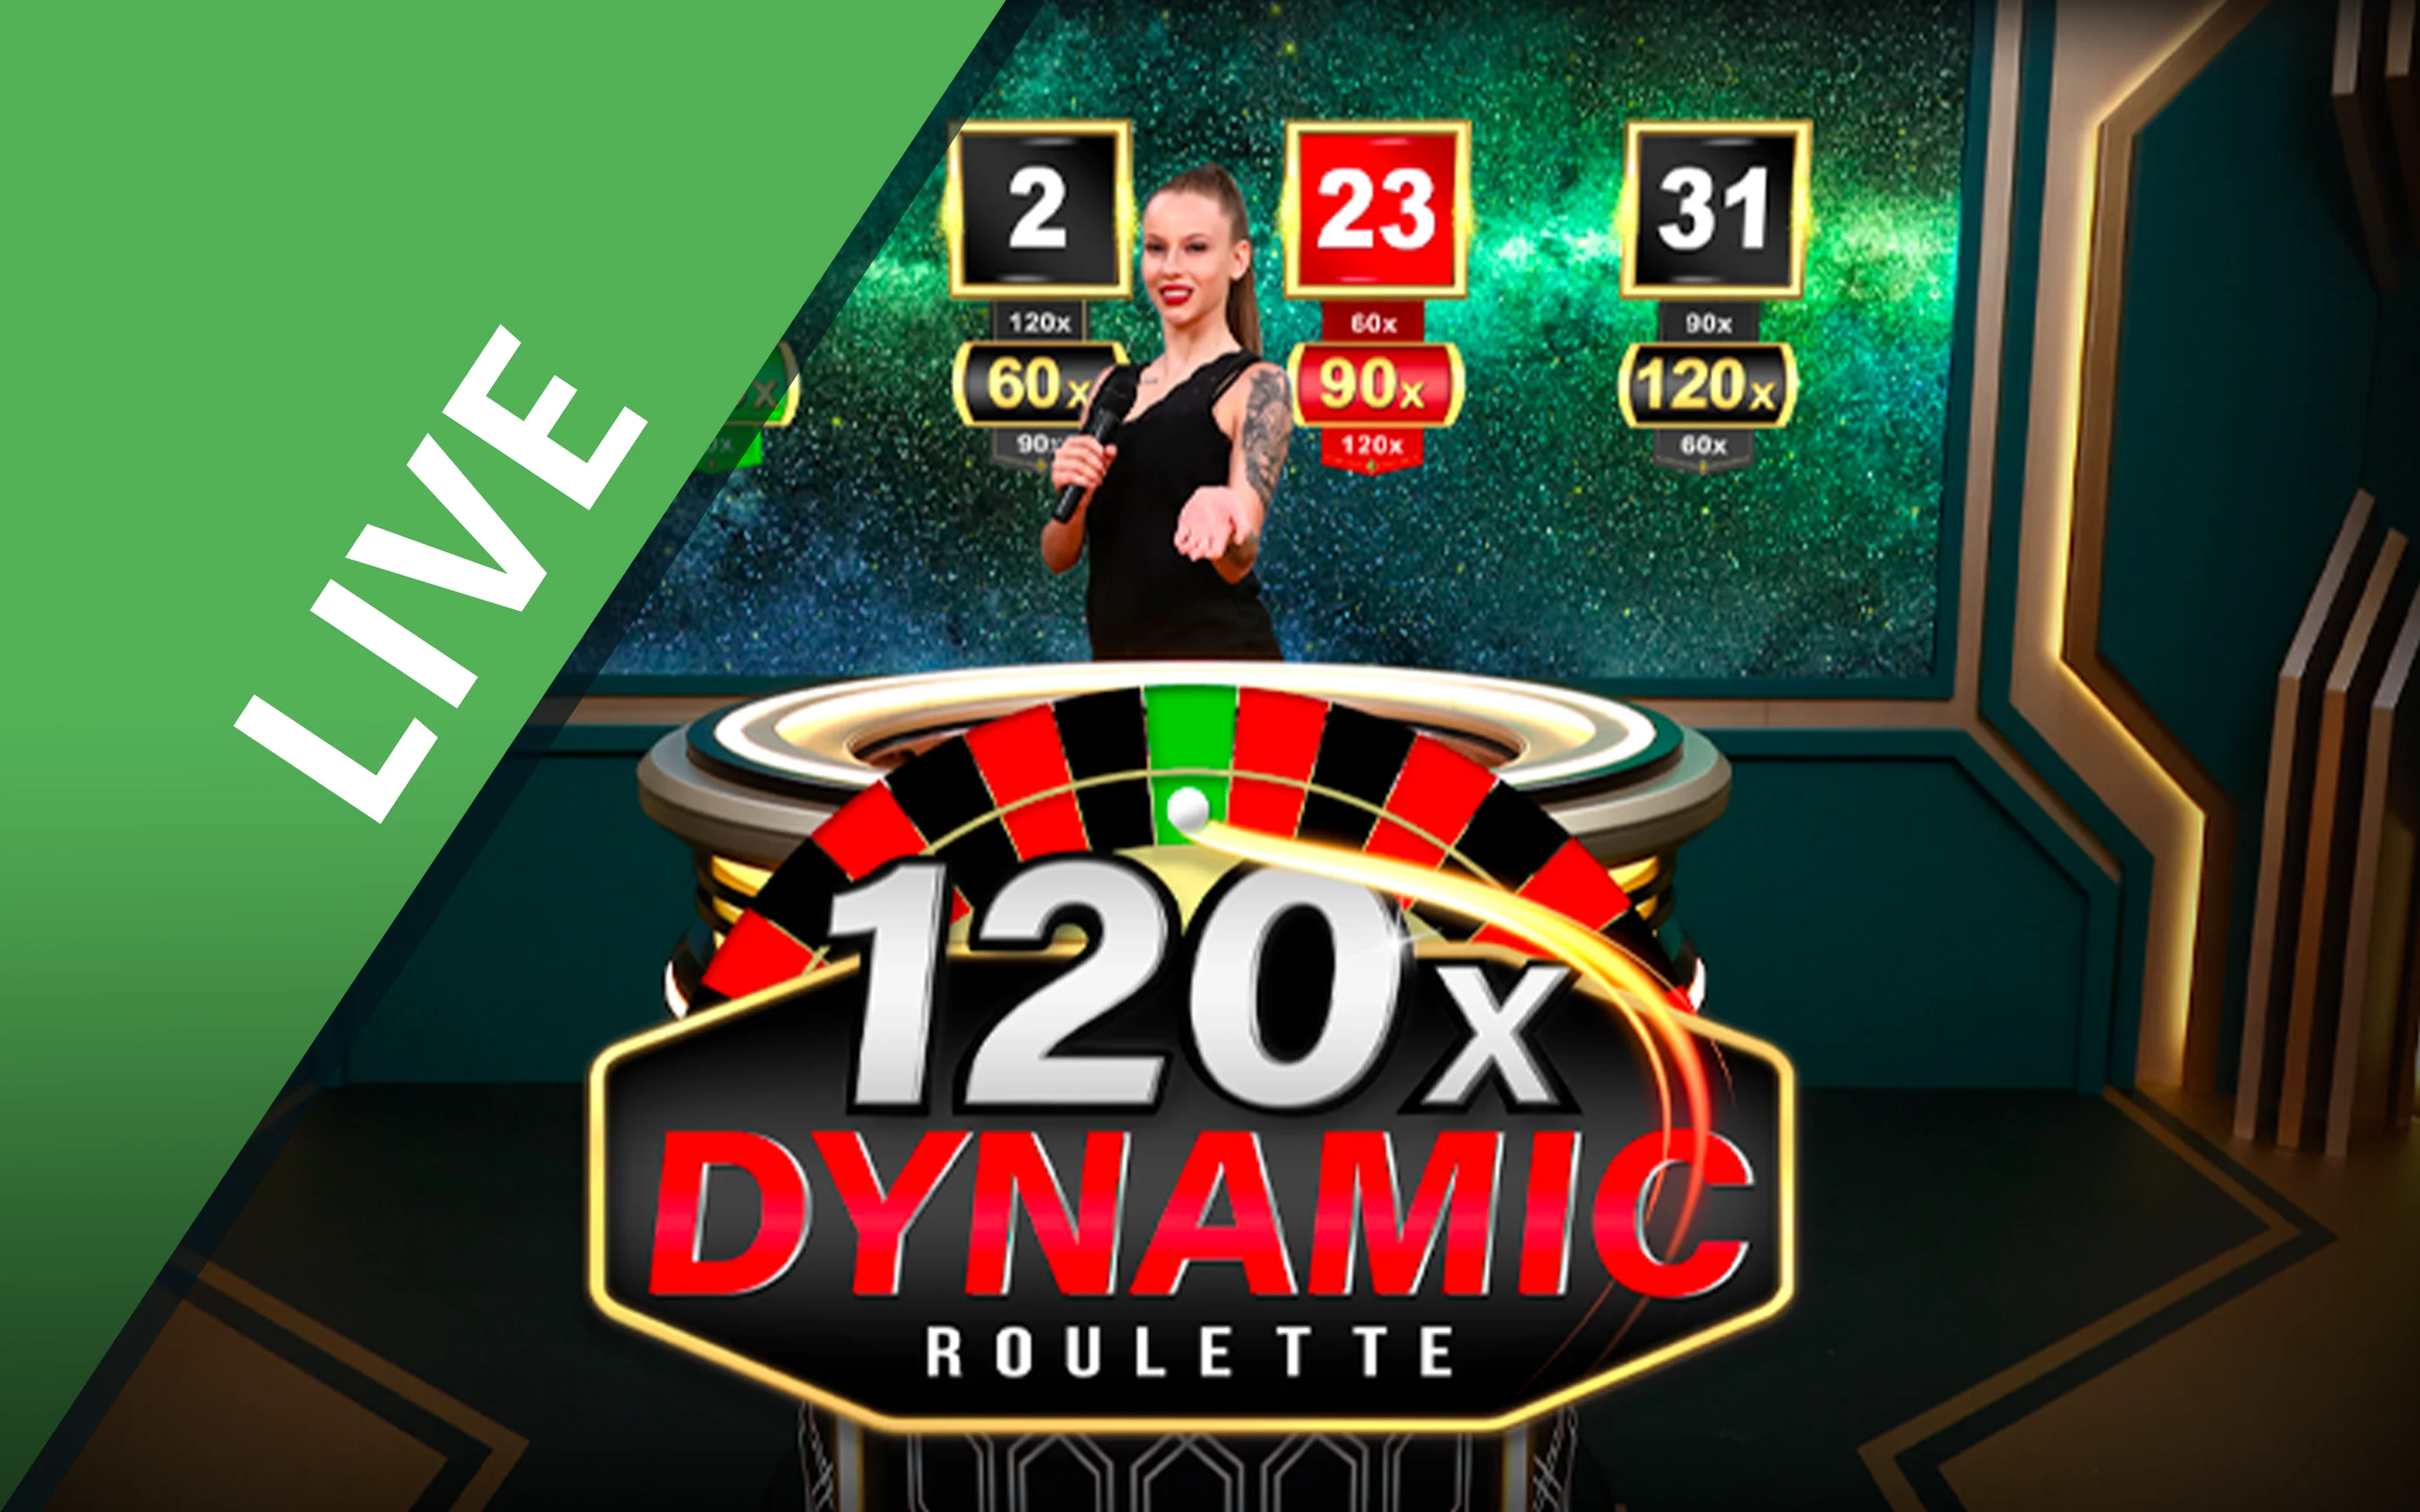 Play Dynamic Roulette 120x on Starcasino.be online casino